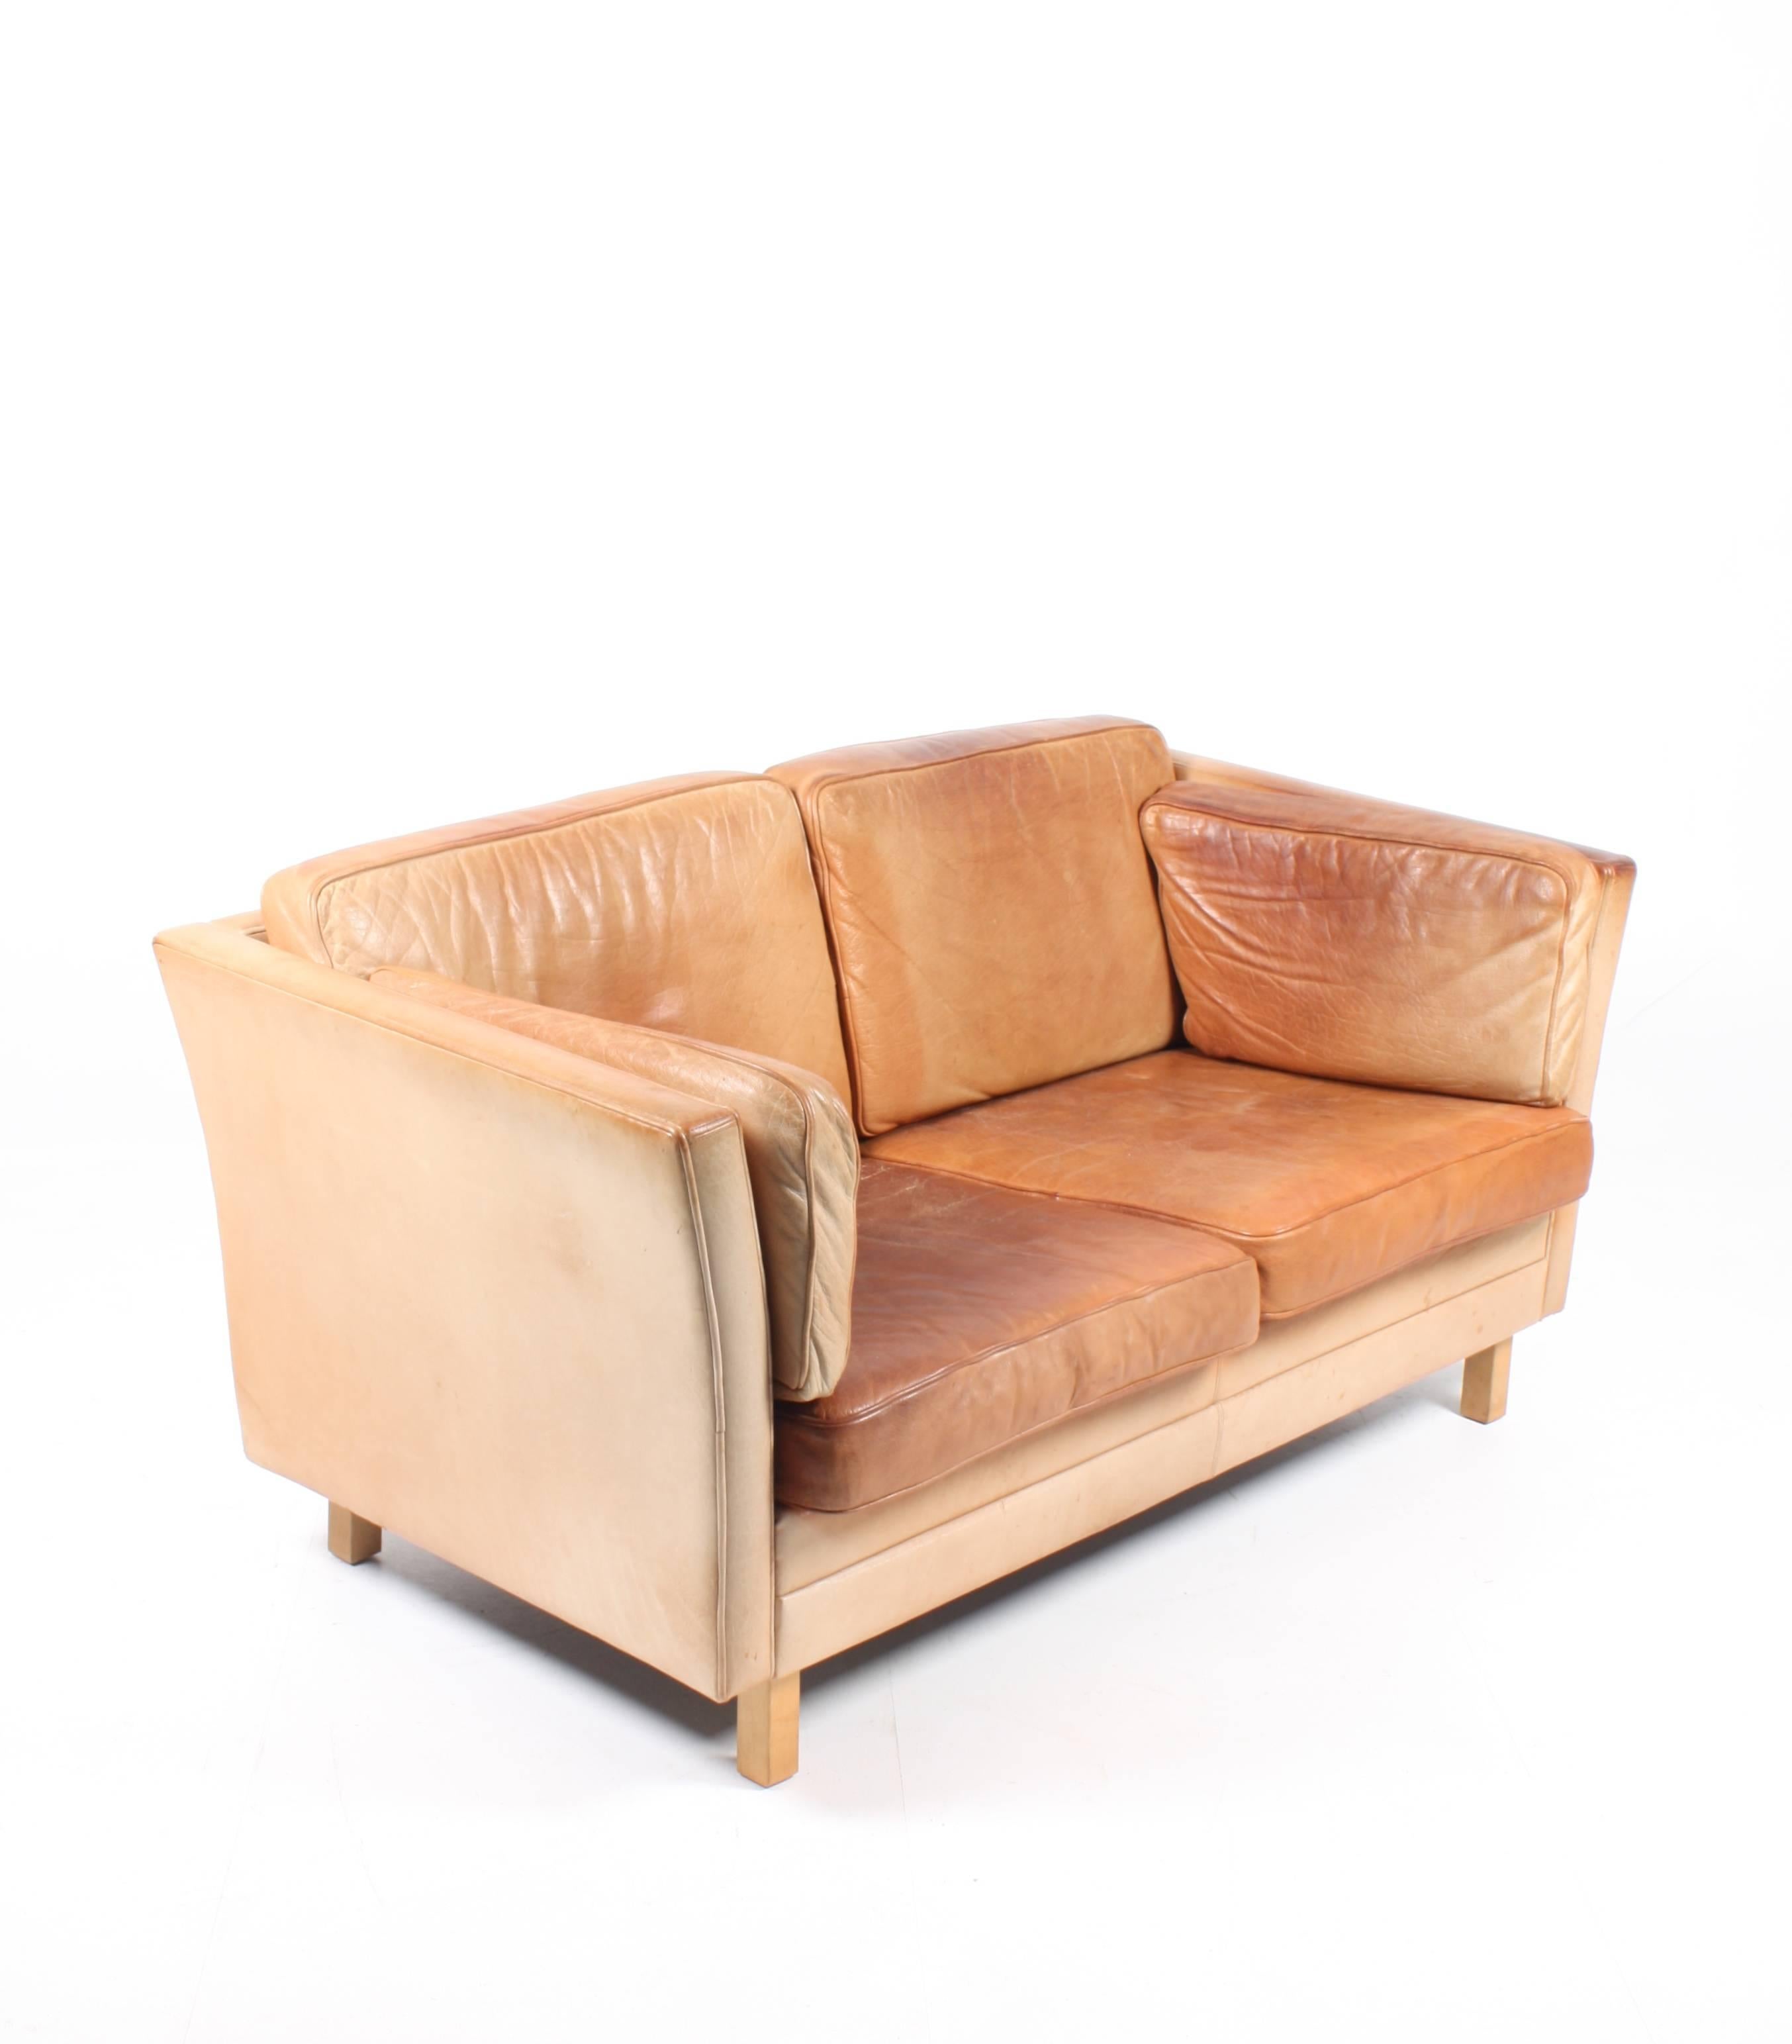 Late 20th Century Danish Sofa in Patinated Leather